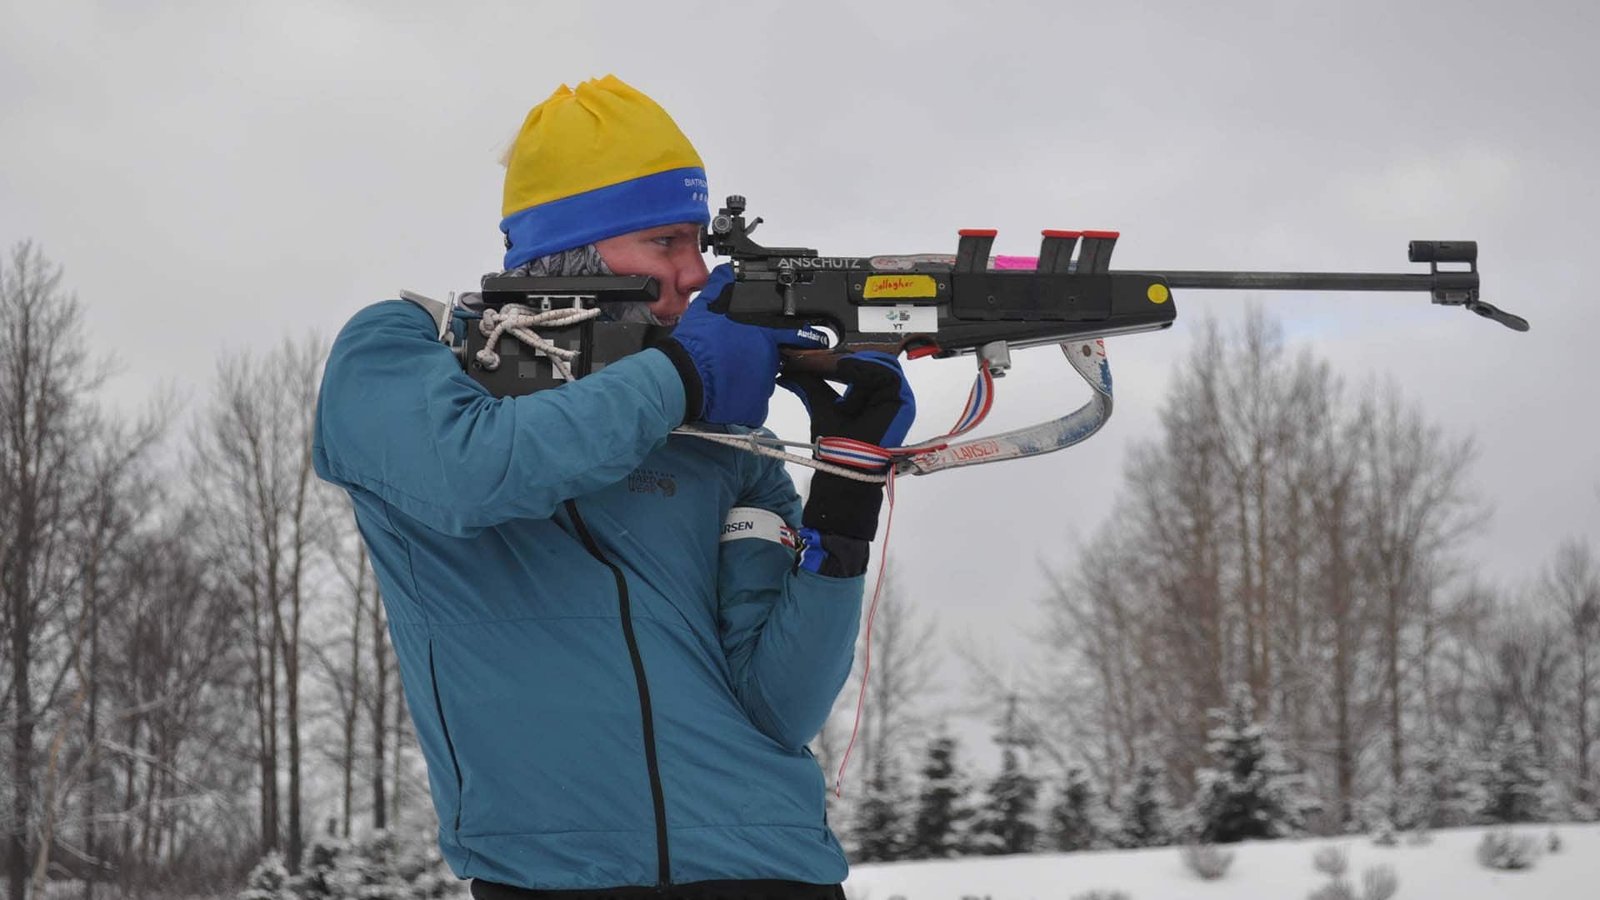 #TheMoment a substitute biathlete won silver at the Arctic Winter Games